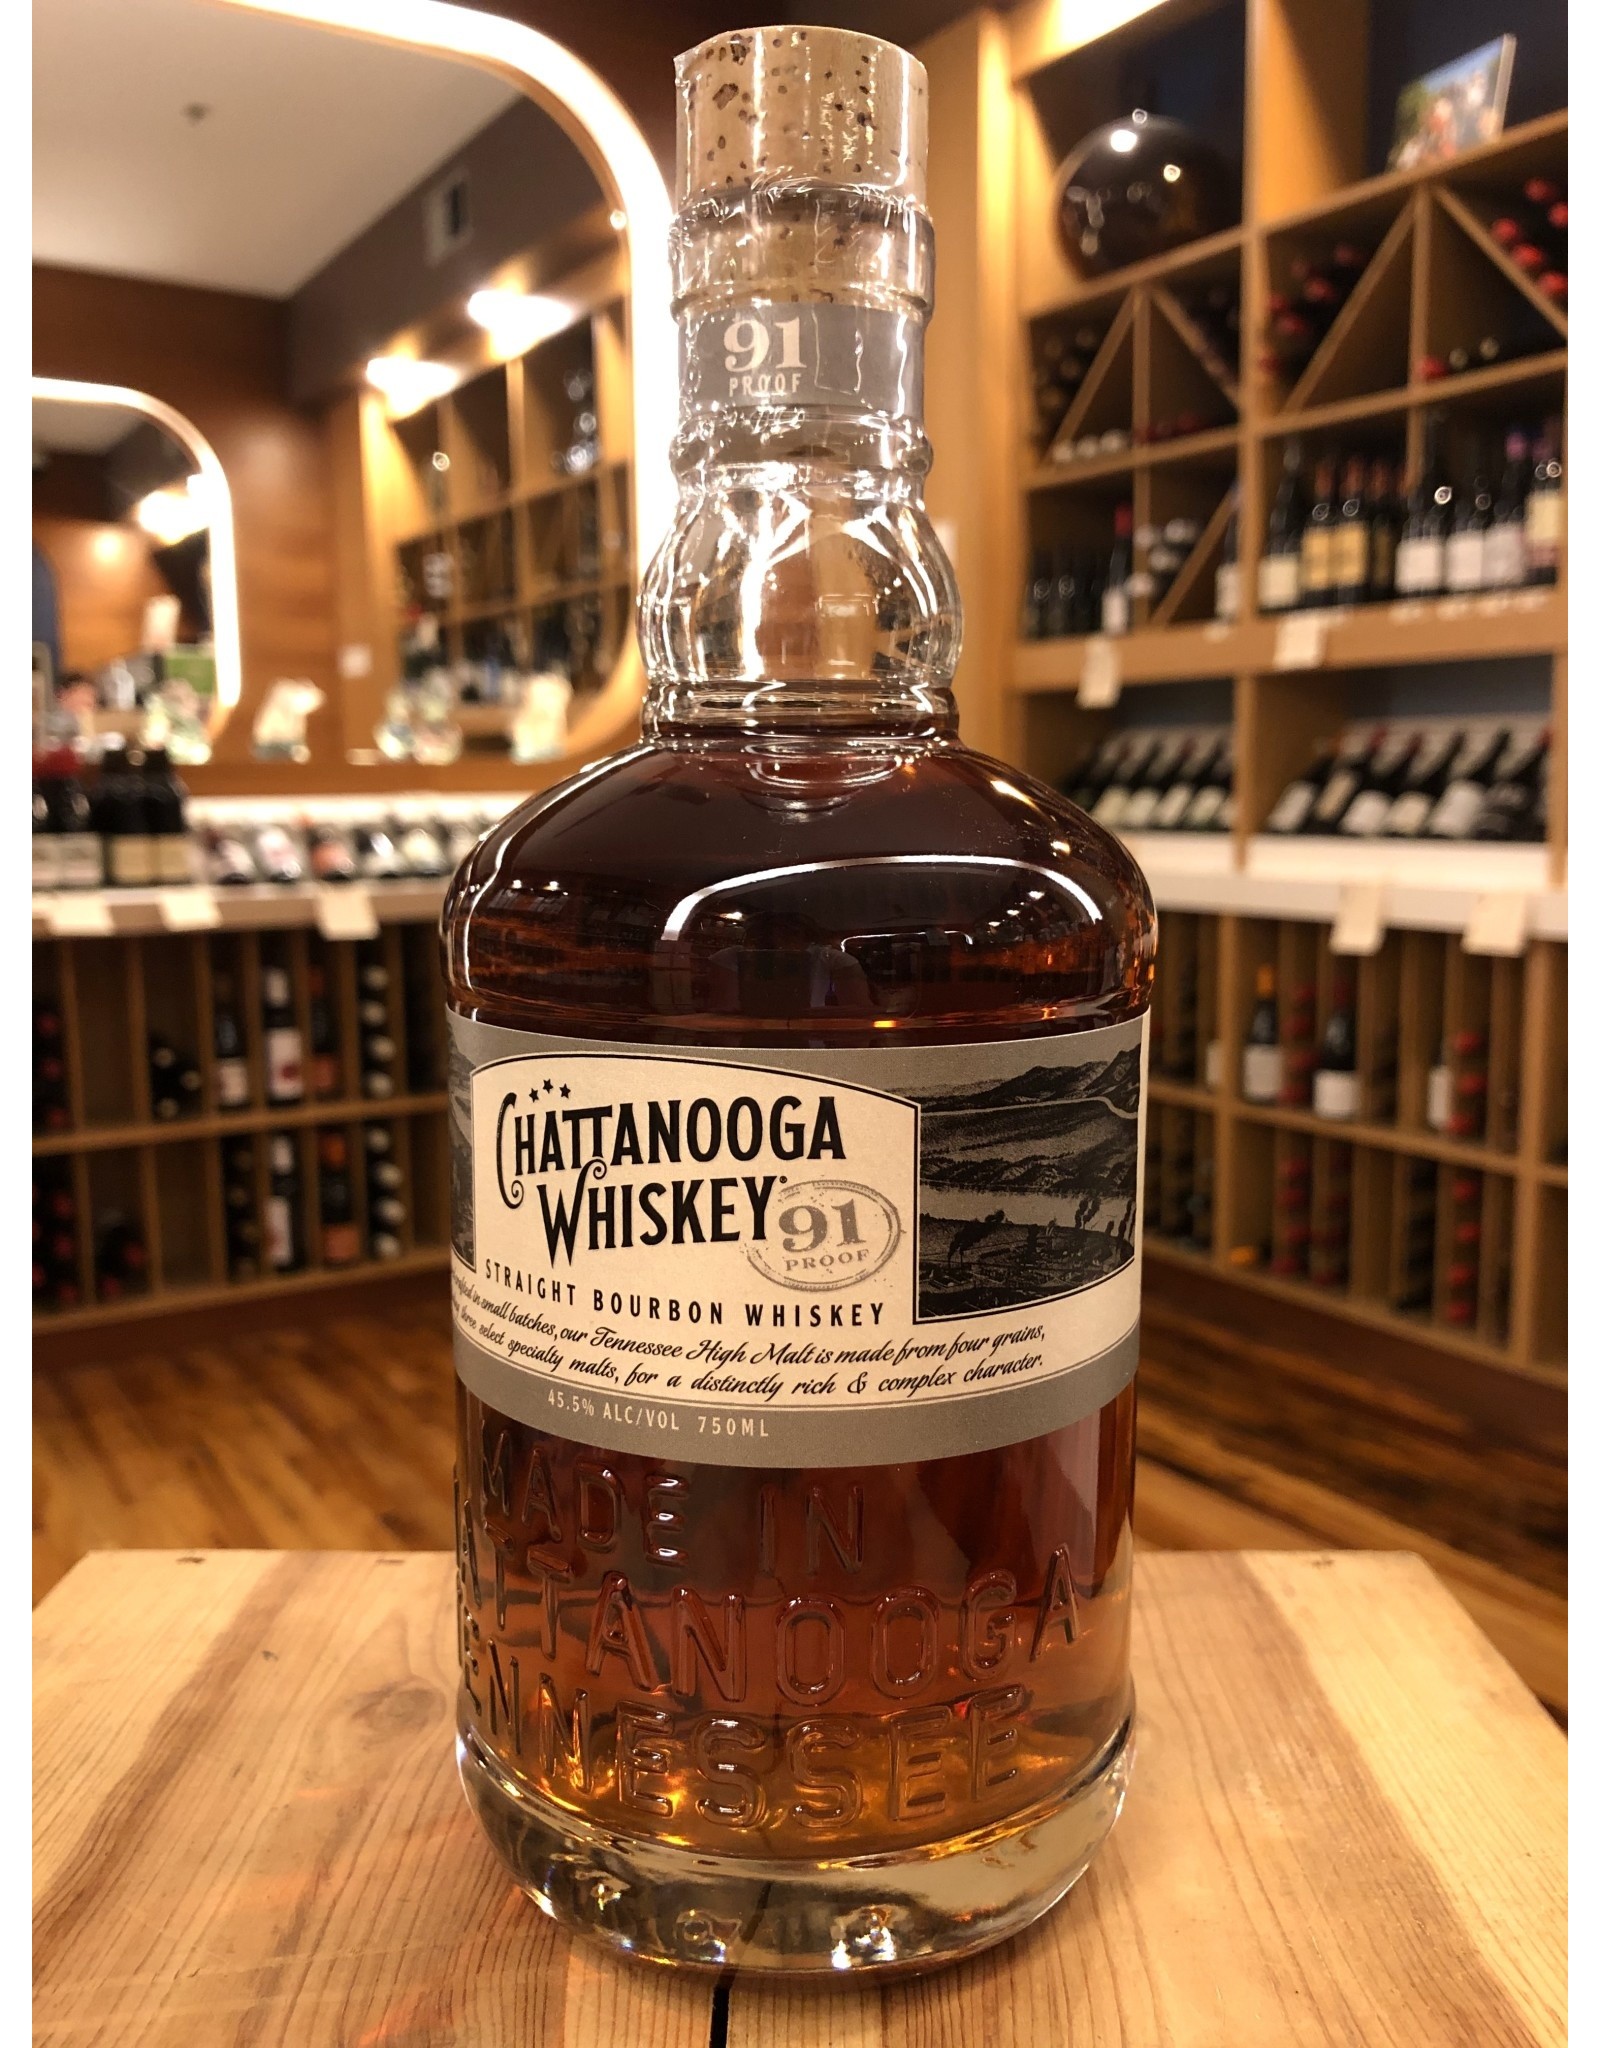 Chattanooga Whiskey 91 proof - 750 ML